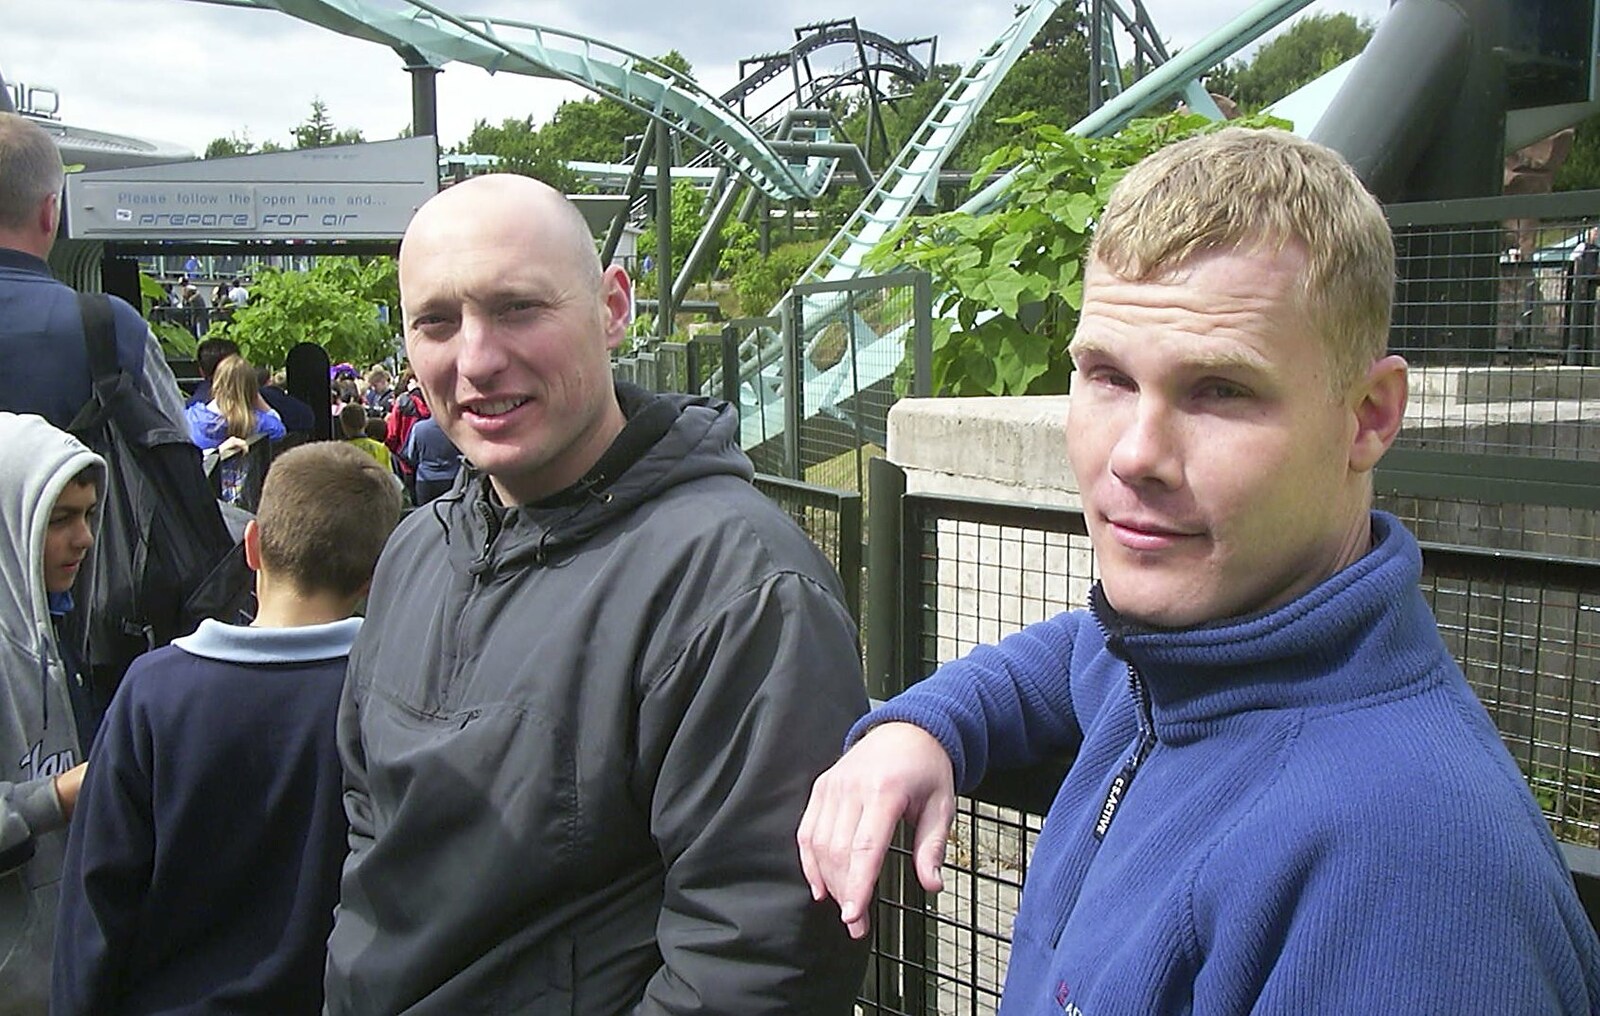 Gov and Mikey-P near the queue for Air from A Trip to Alton Towers, Staffordshire - 19th June 2004